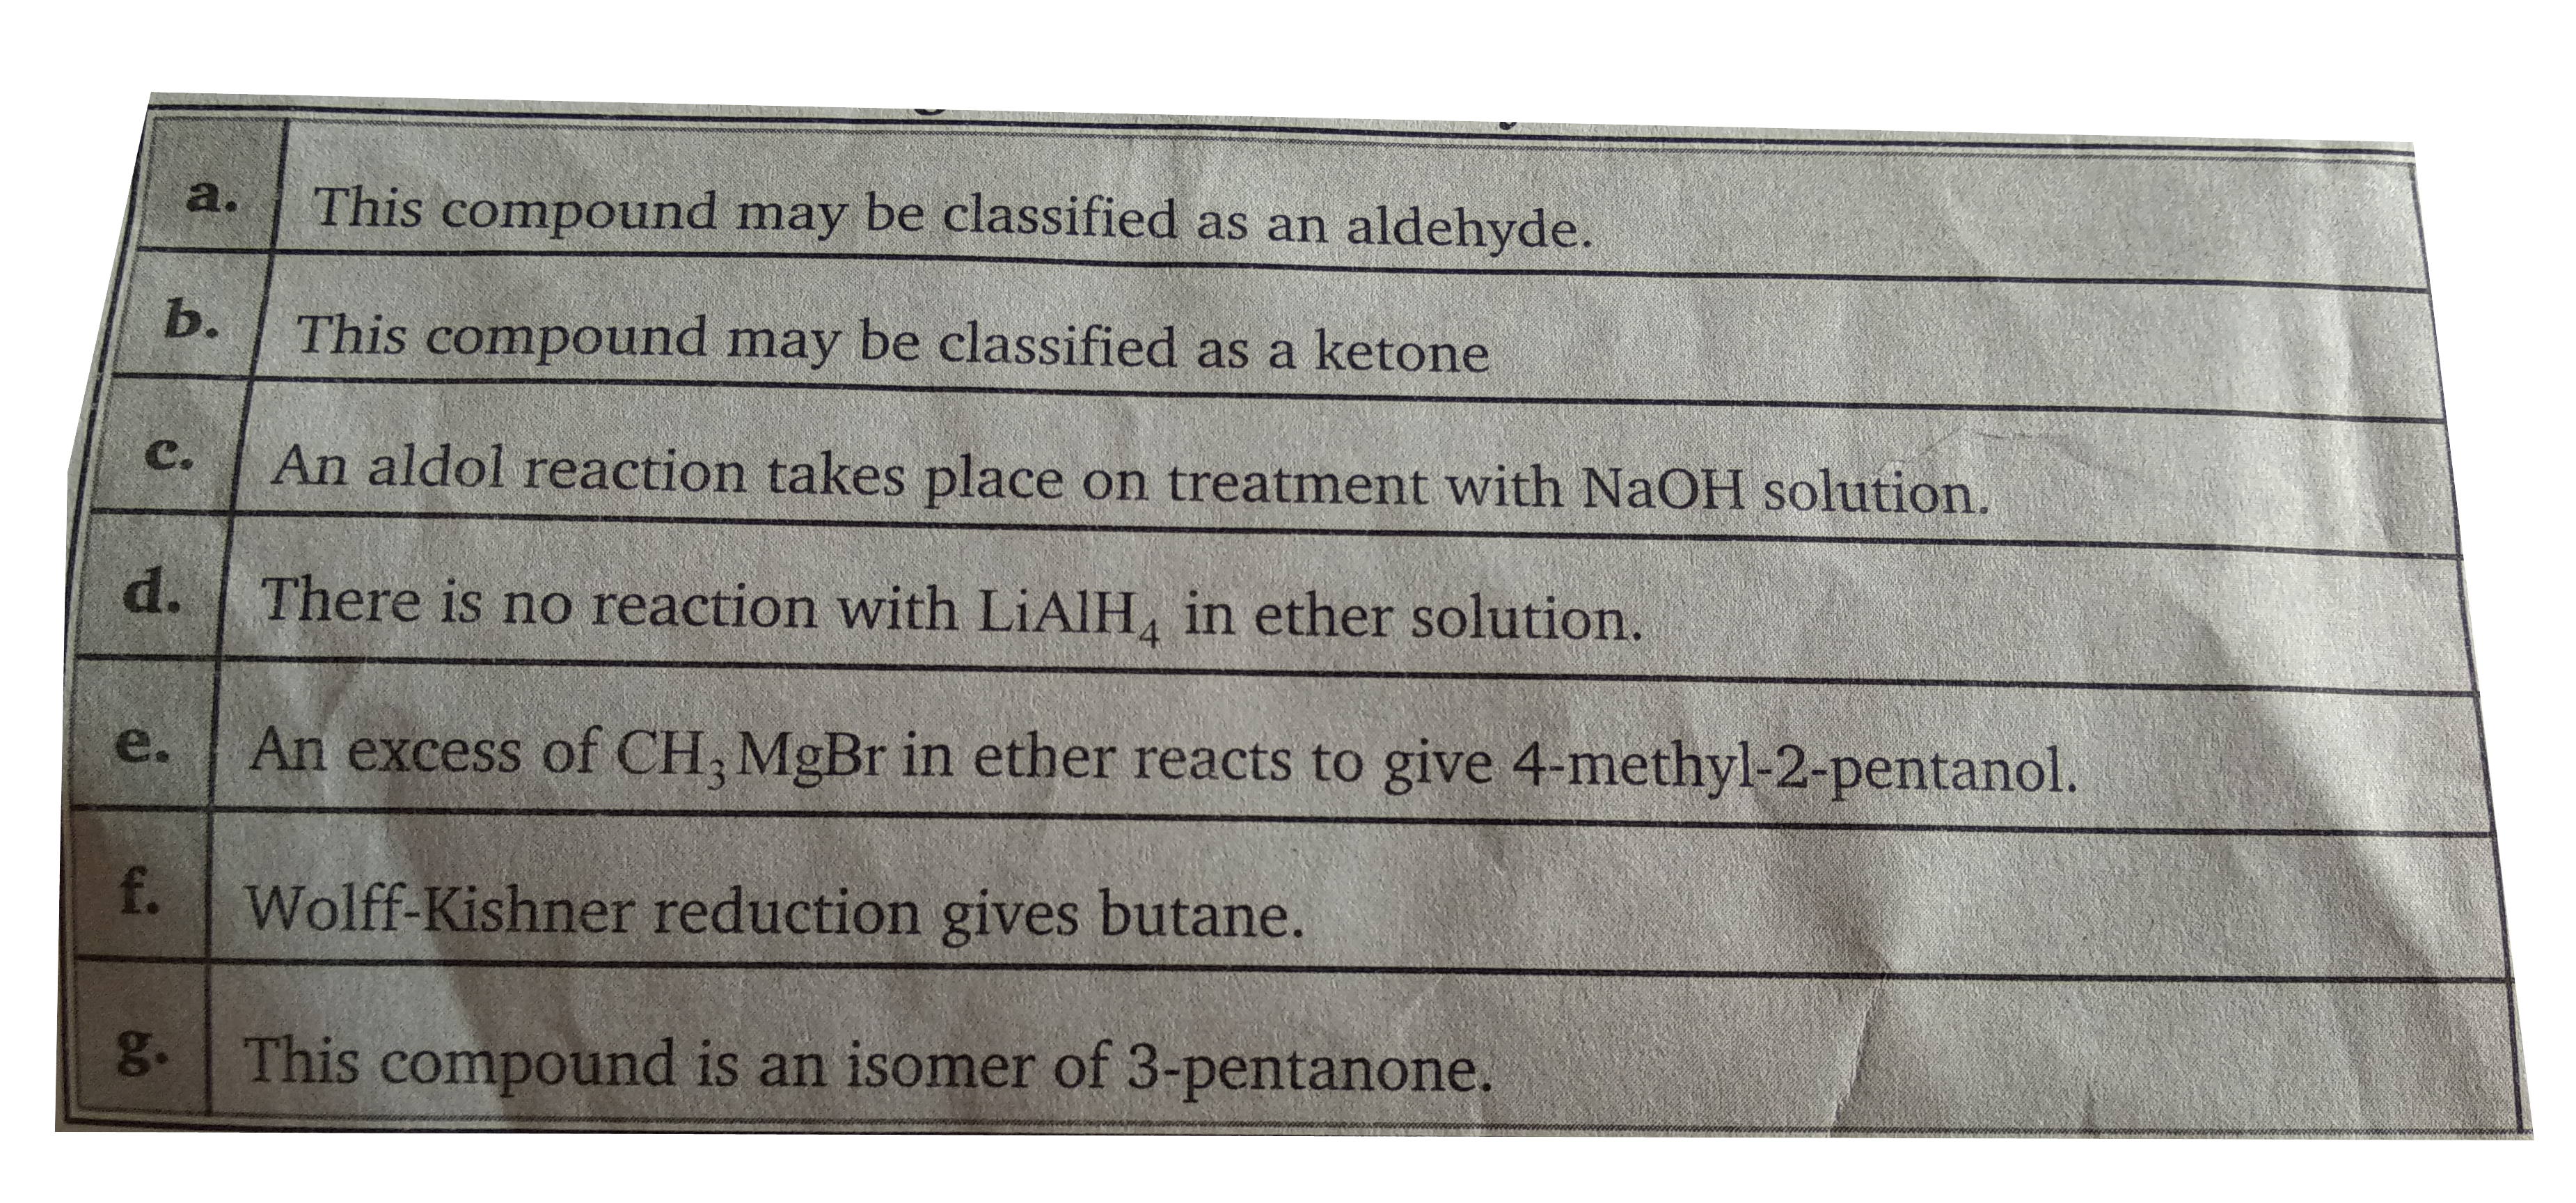 Which of the following is true for 3-methylbutanol ?